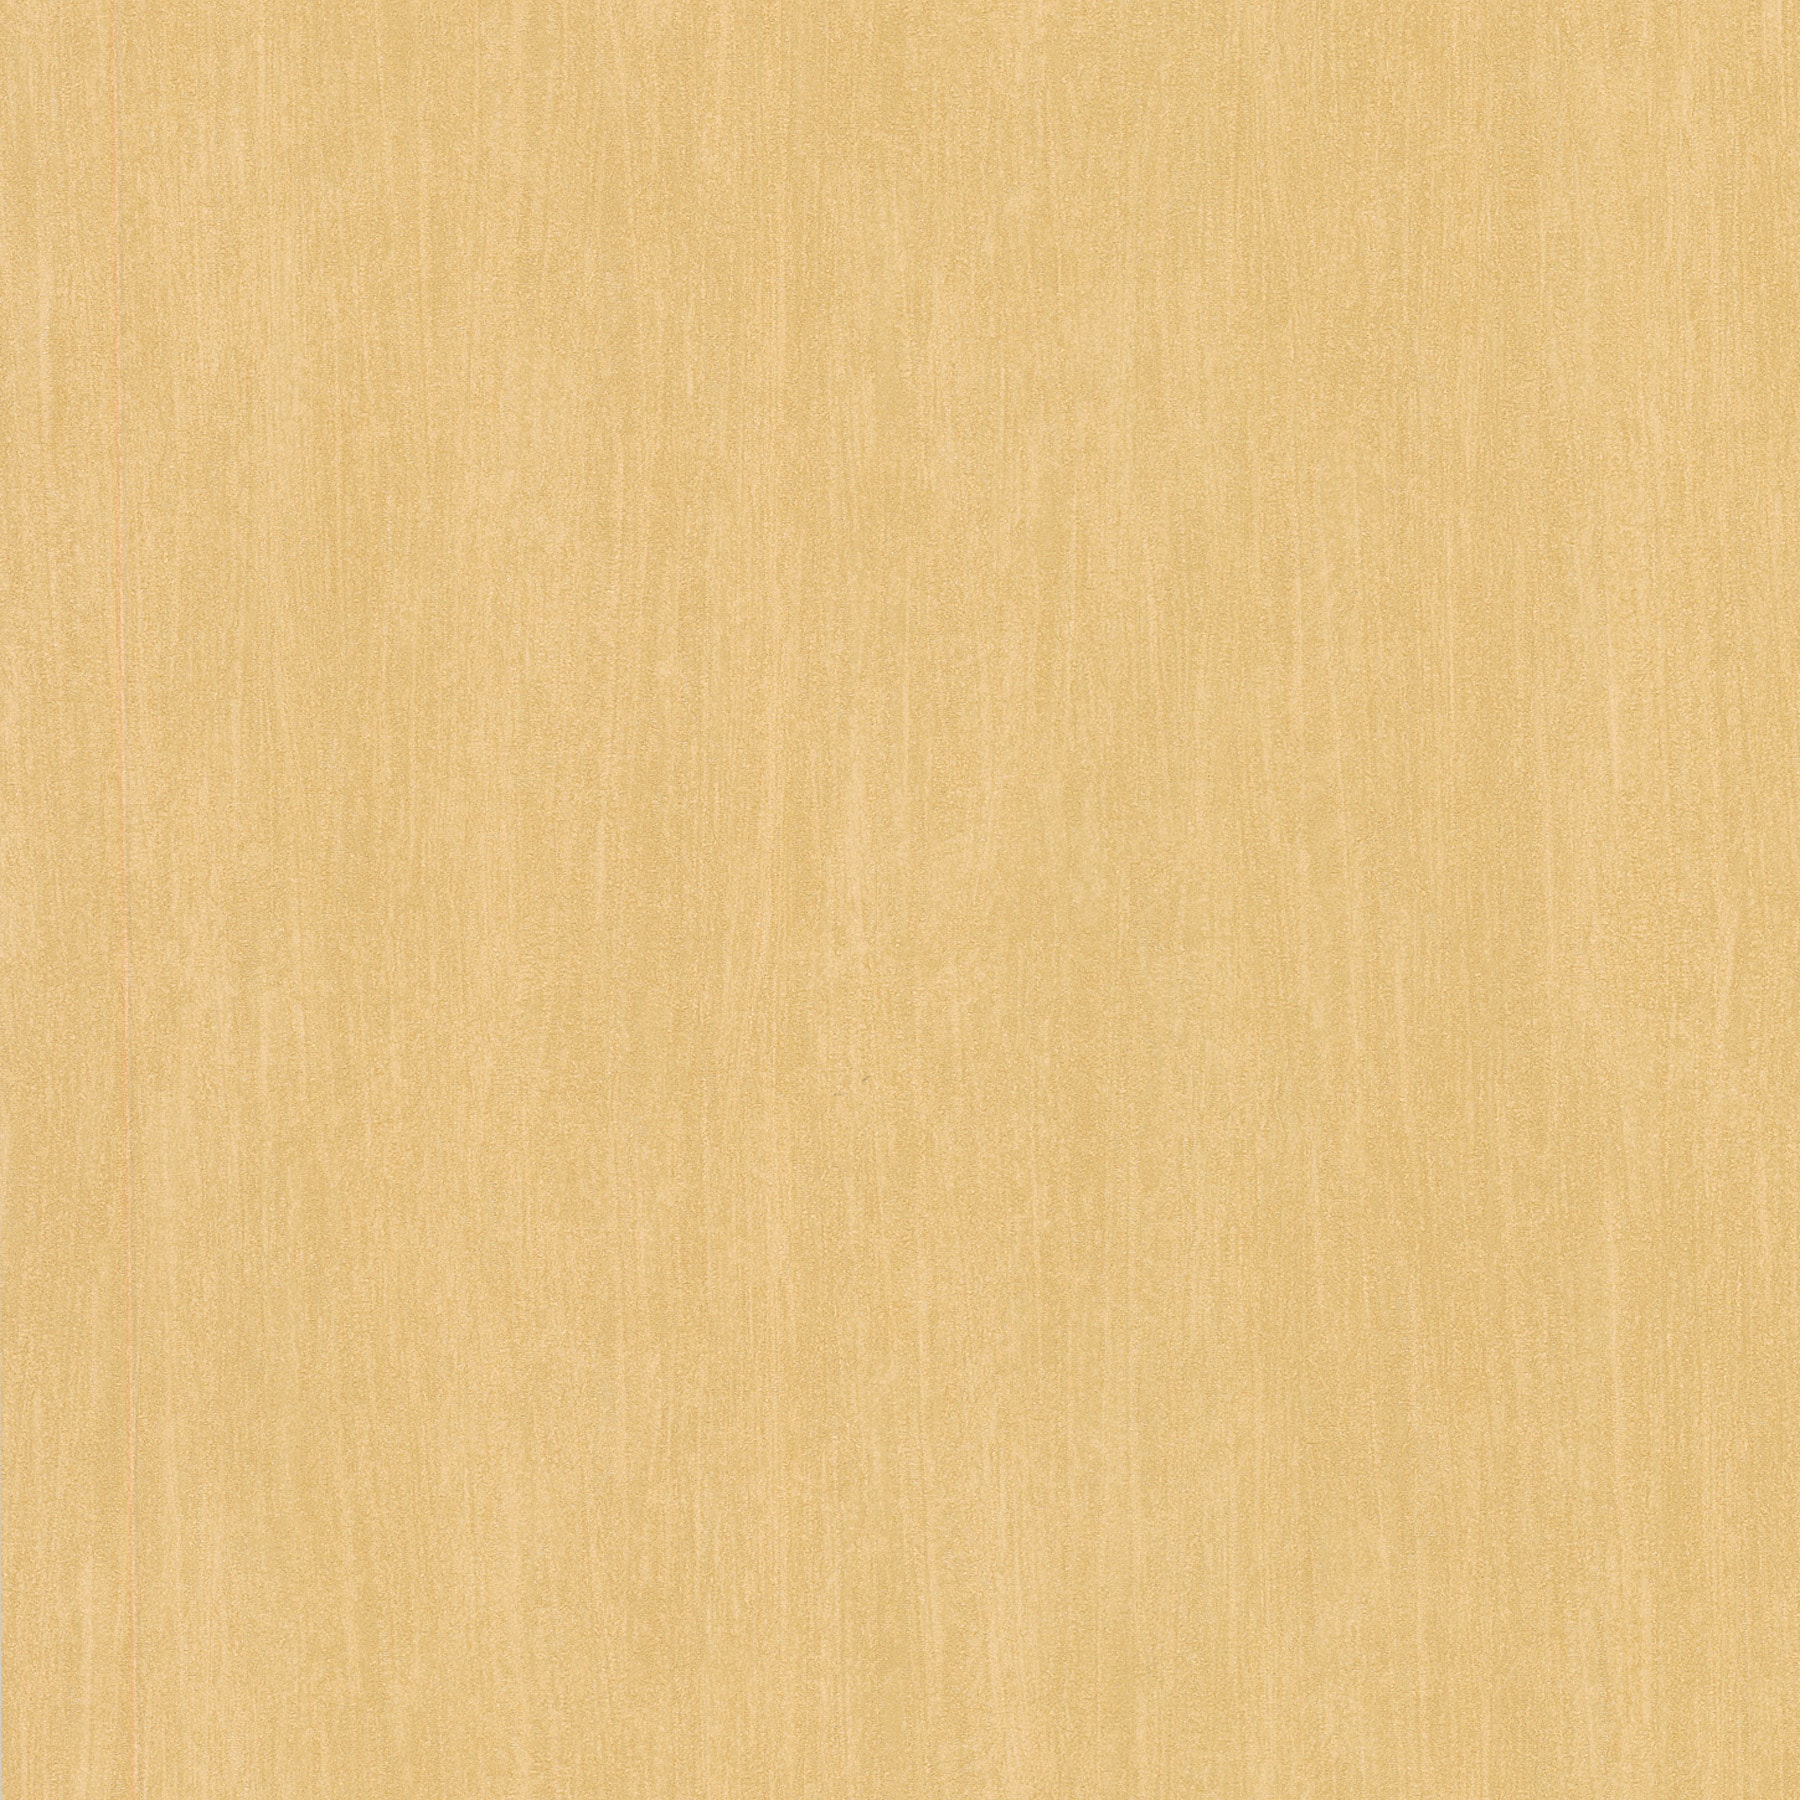 Brewster Tan Texture Wallpaper (TanShape LongDimensions 27 inches wide x 27 feet longBoy/Girl/Neutral NeutralTheme TraditionalMaterials Solid Sheet VinylCare Instructions ScrubbableHanging Instructions Prepasted )